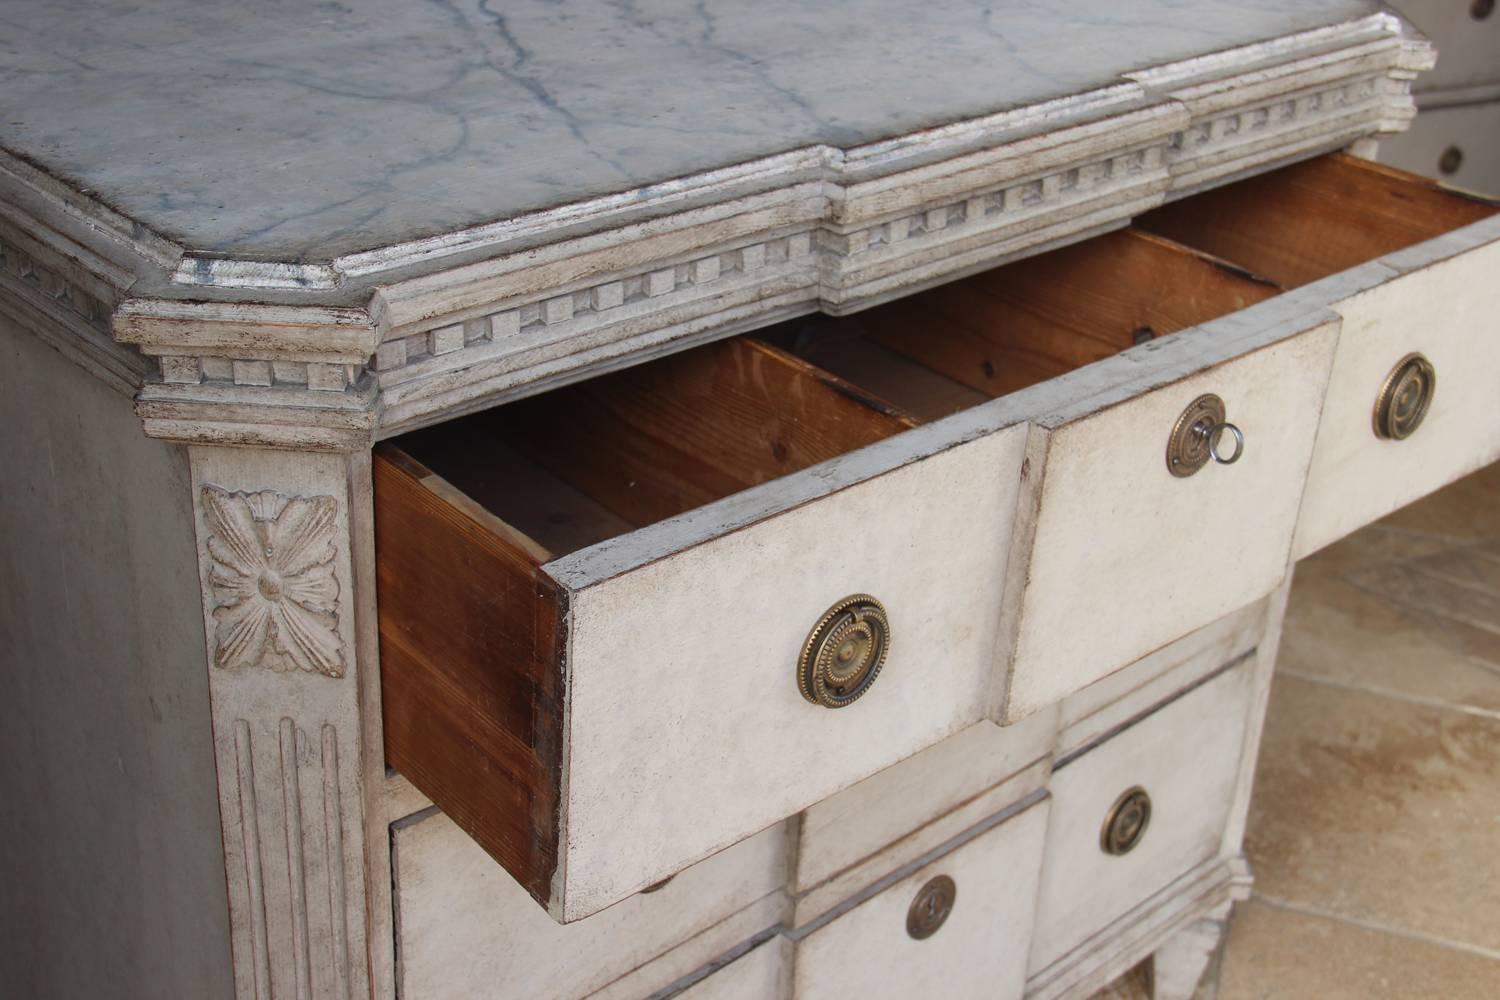 A beautiful Swedish Gustavian breakfront chest from the 19th century with a hand-painted marbleized top, framed by dentil molding. There are three drawers with brass hardware and the top drawer is divided into three sections. The corner posts are